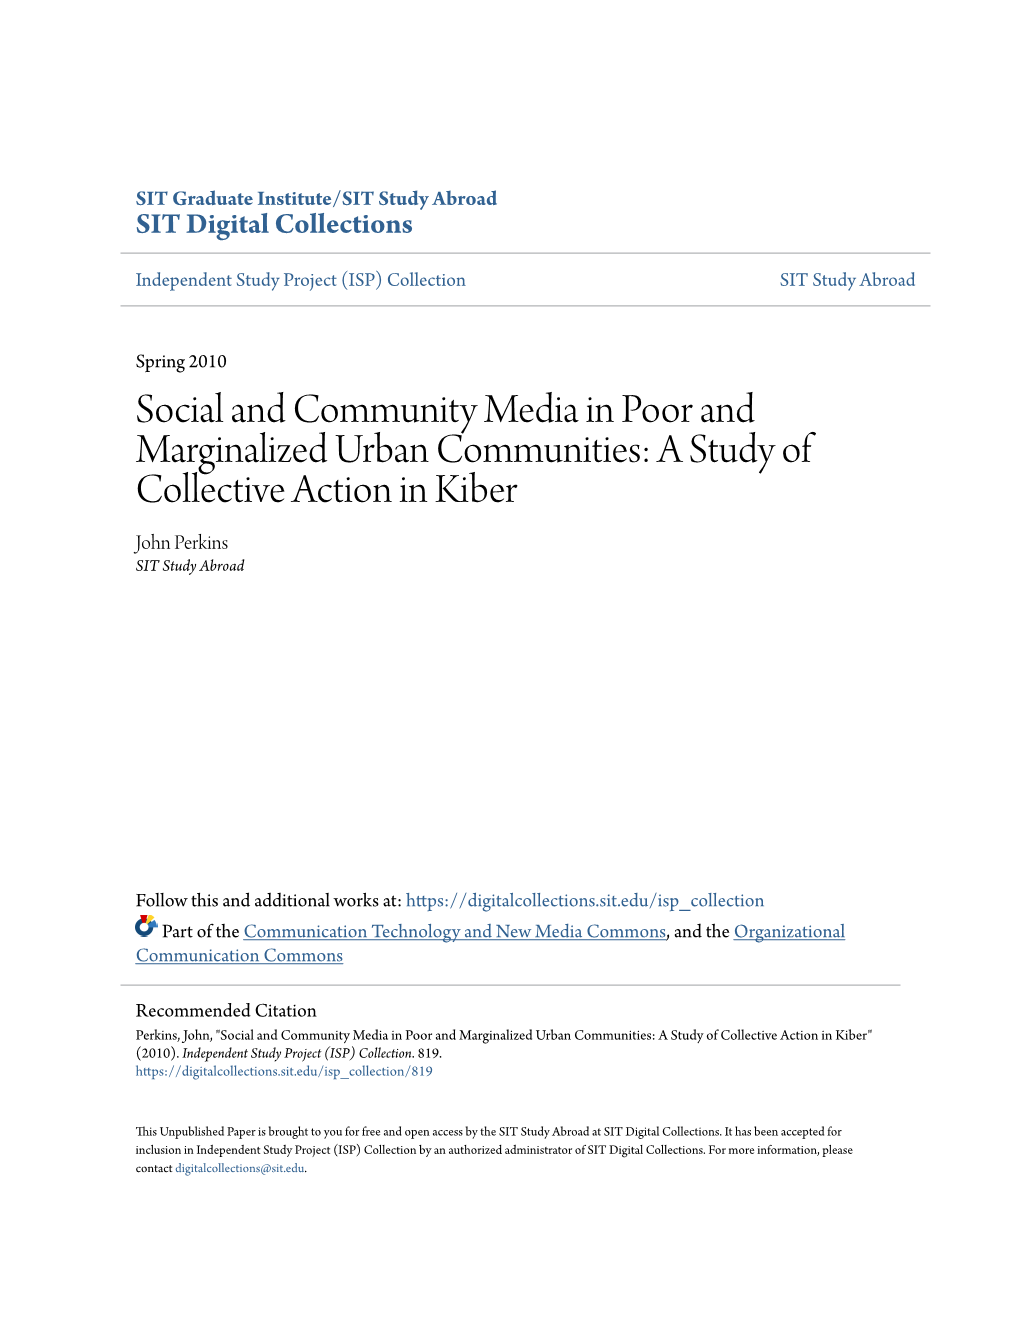 A Study of Collective Action in Kiber John Perkins SIT Study Abroad